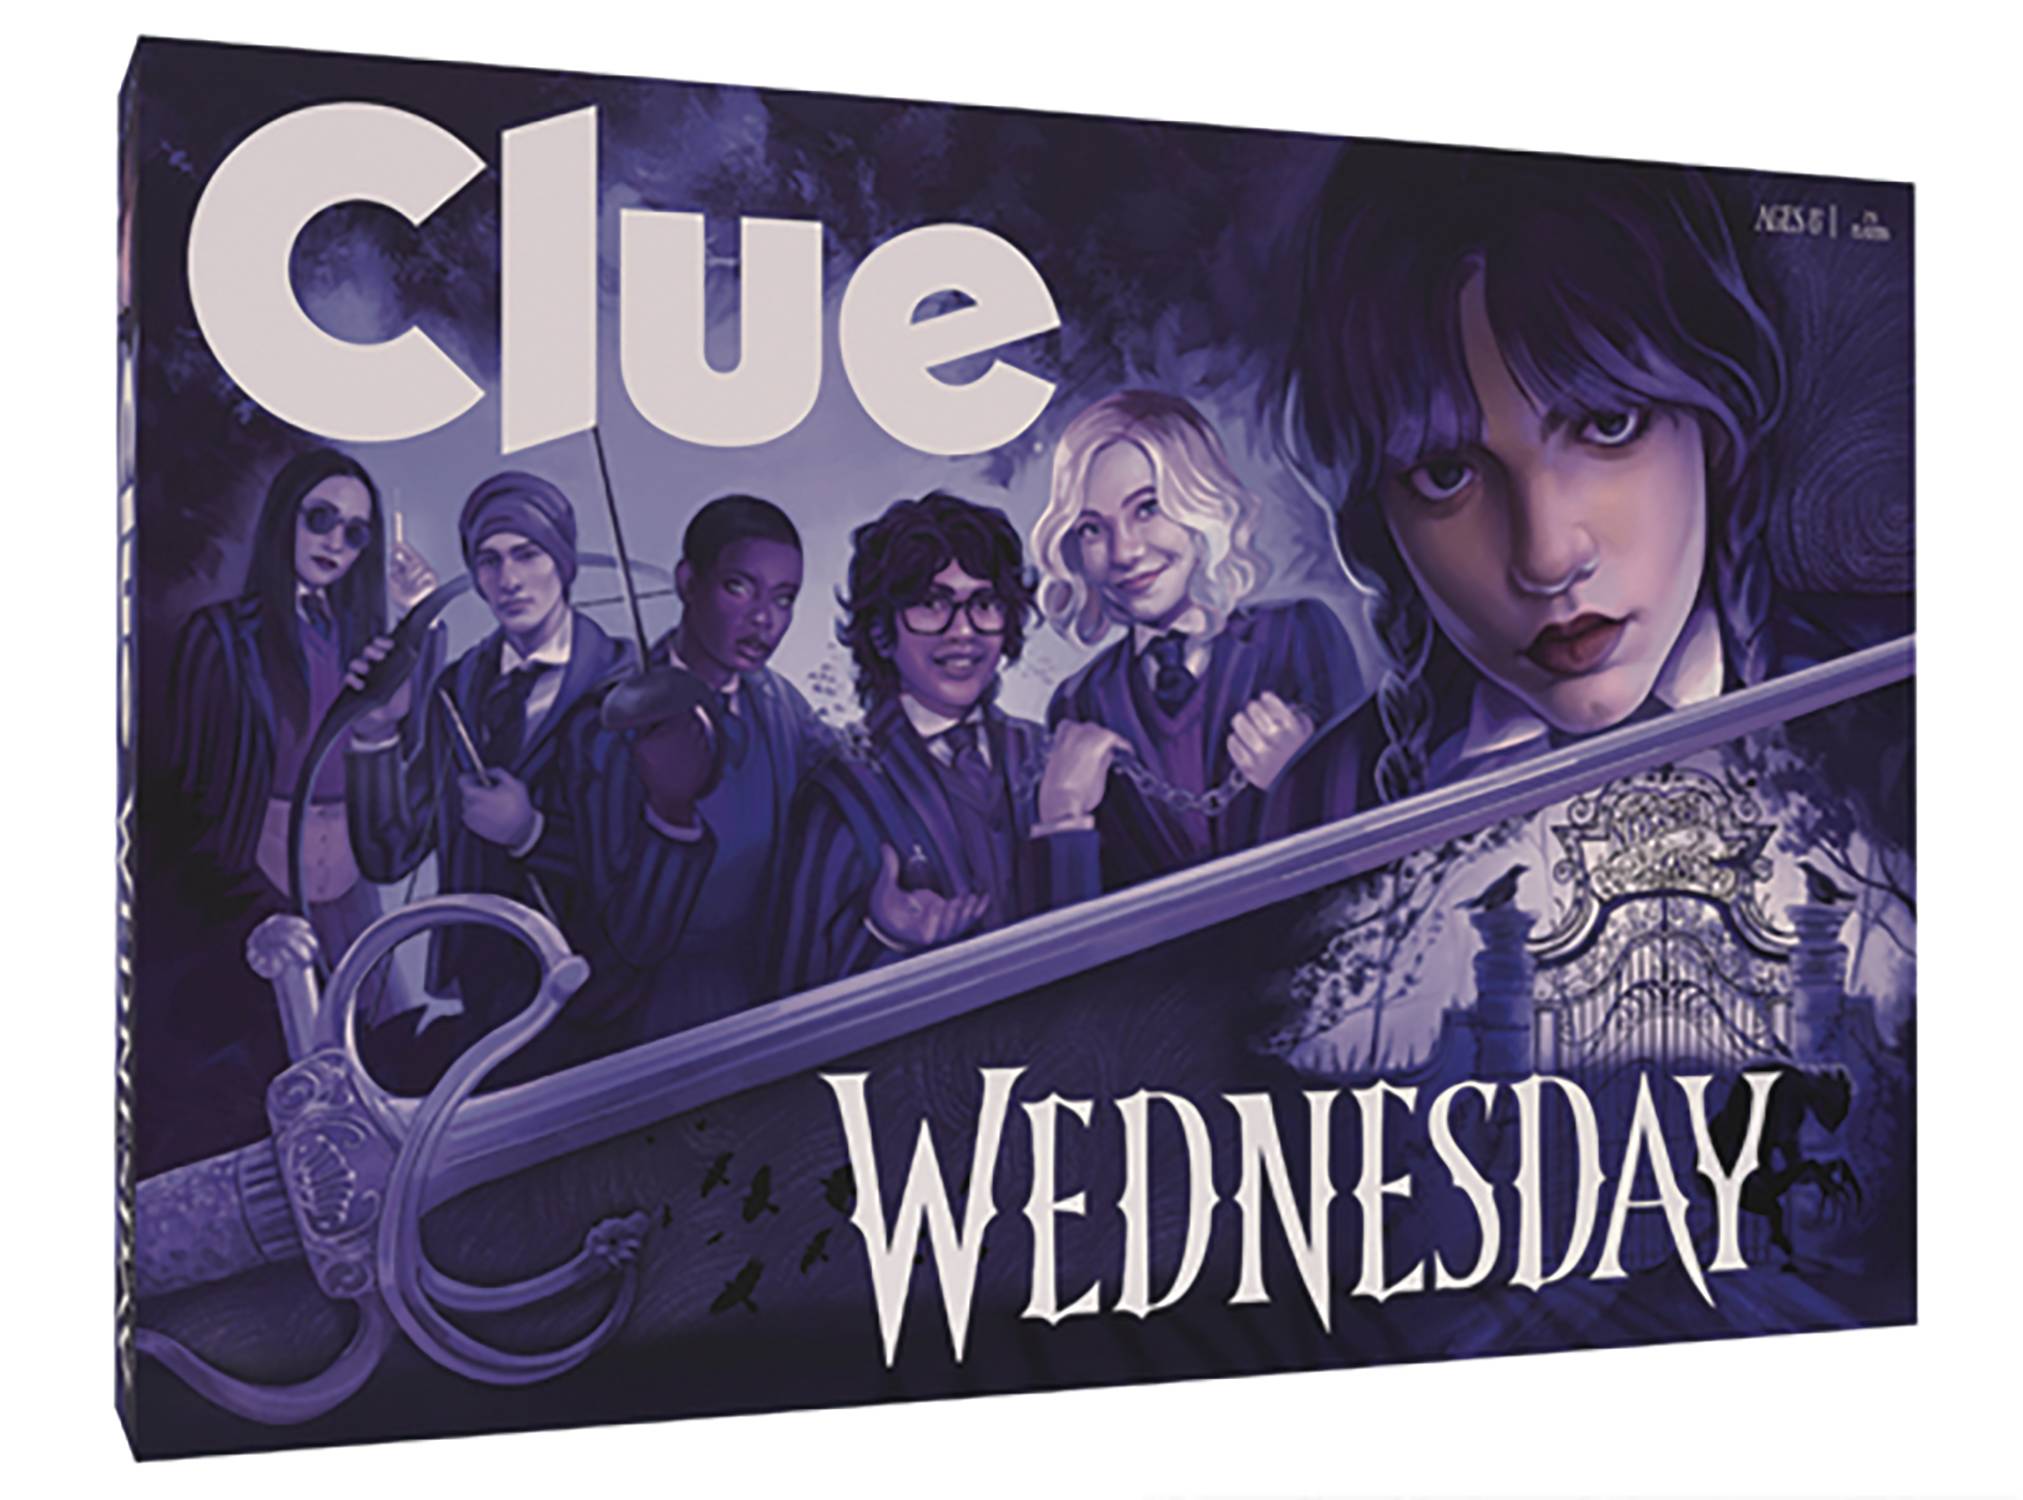 CLUE WEDNESDAY BOARD GAME